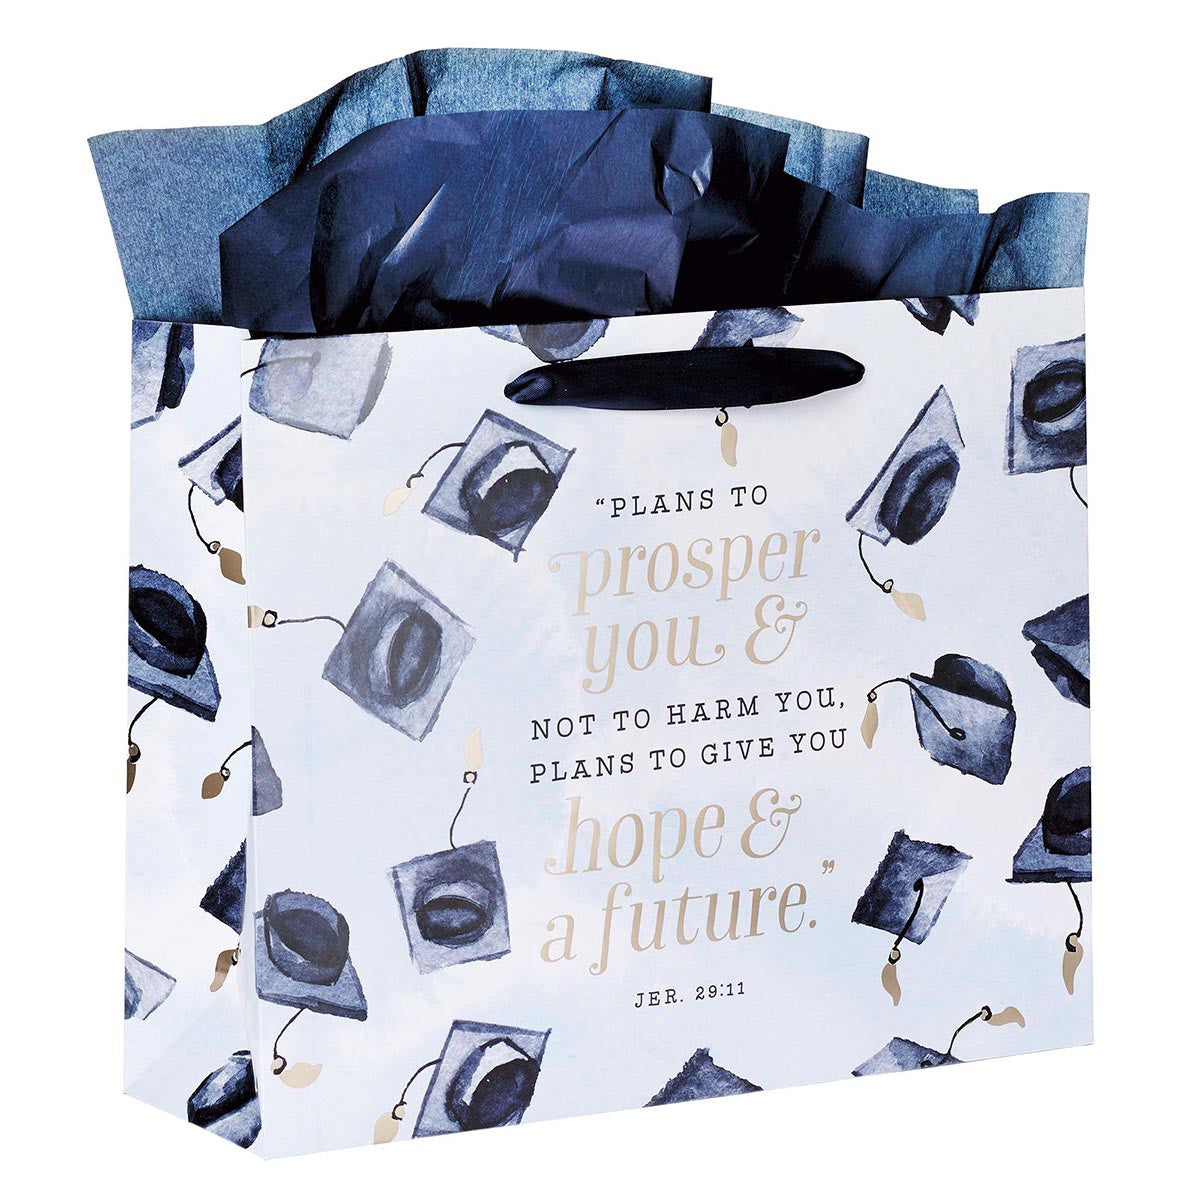 Hope & a Future Large Blue Gift Bag Set for Graduates with Card and Envelope - Jeremiah 29:11 - The Christian Gift Company